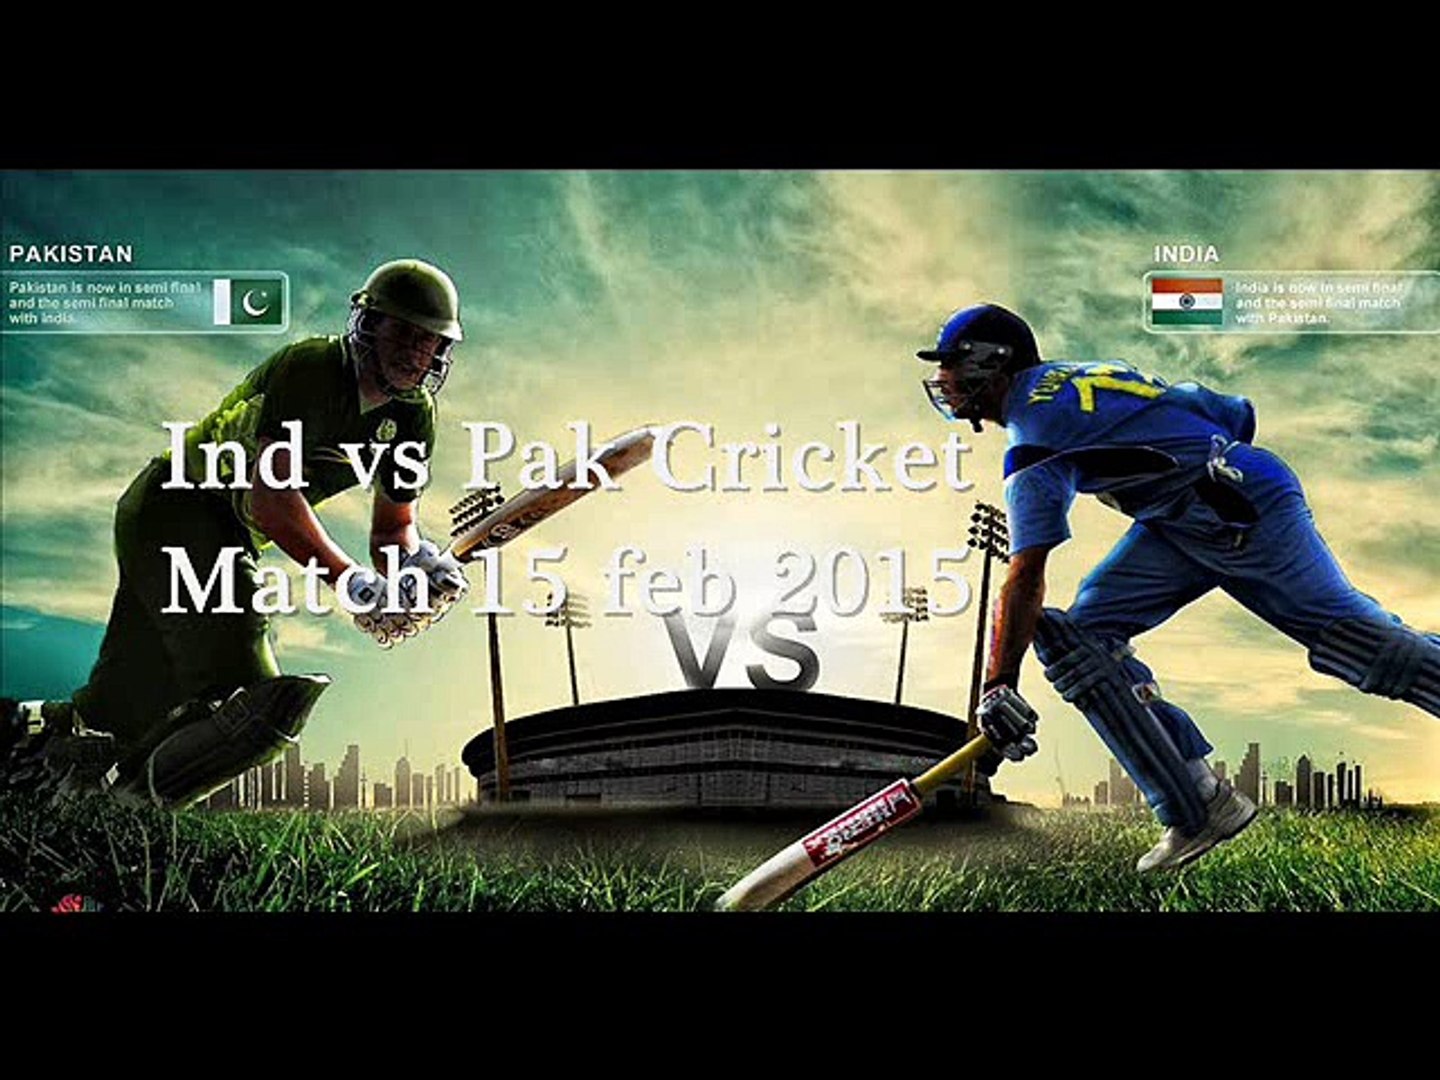 how to watch Cricket pak vs ind 15 feb 2015 at Adelaide Australia